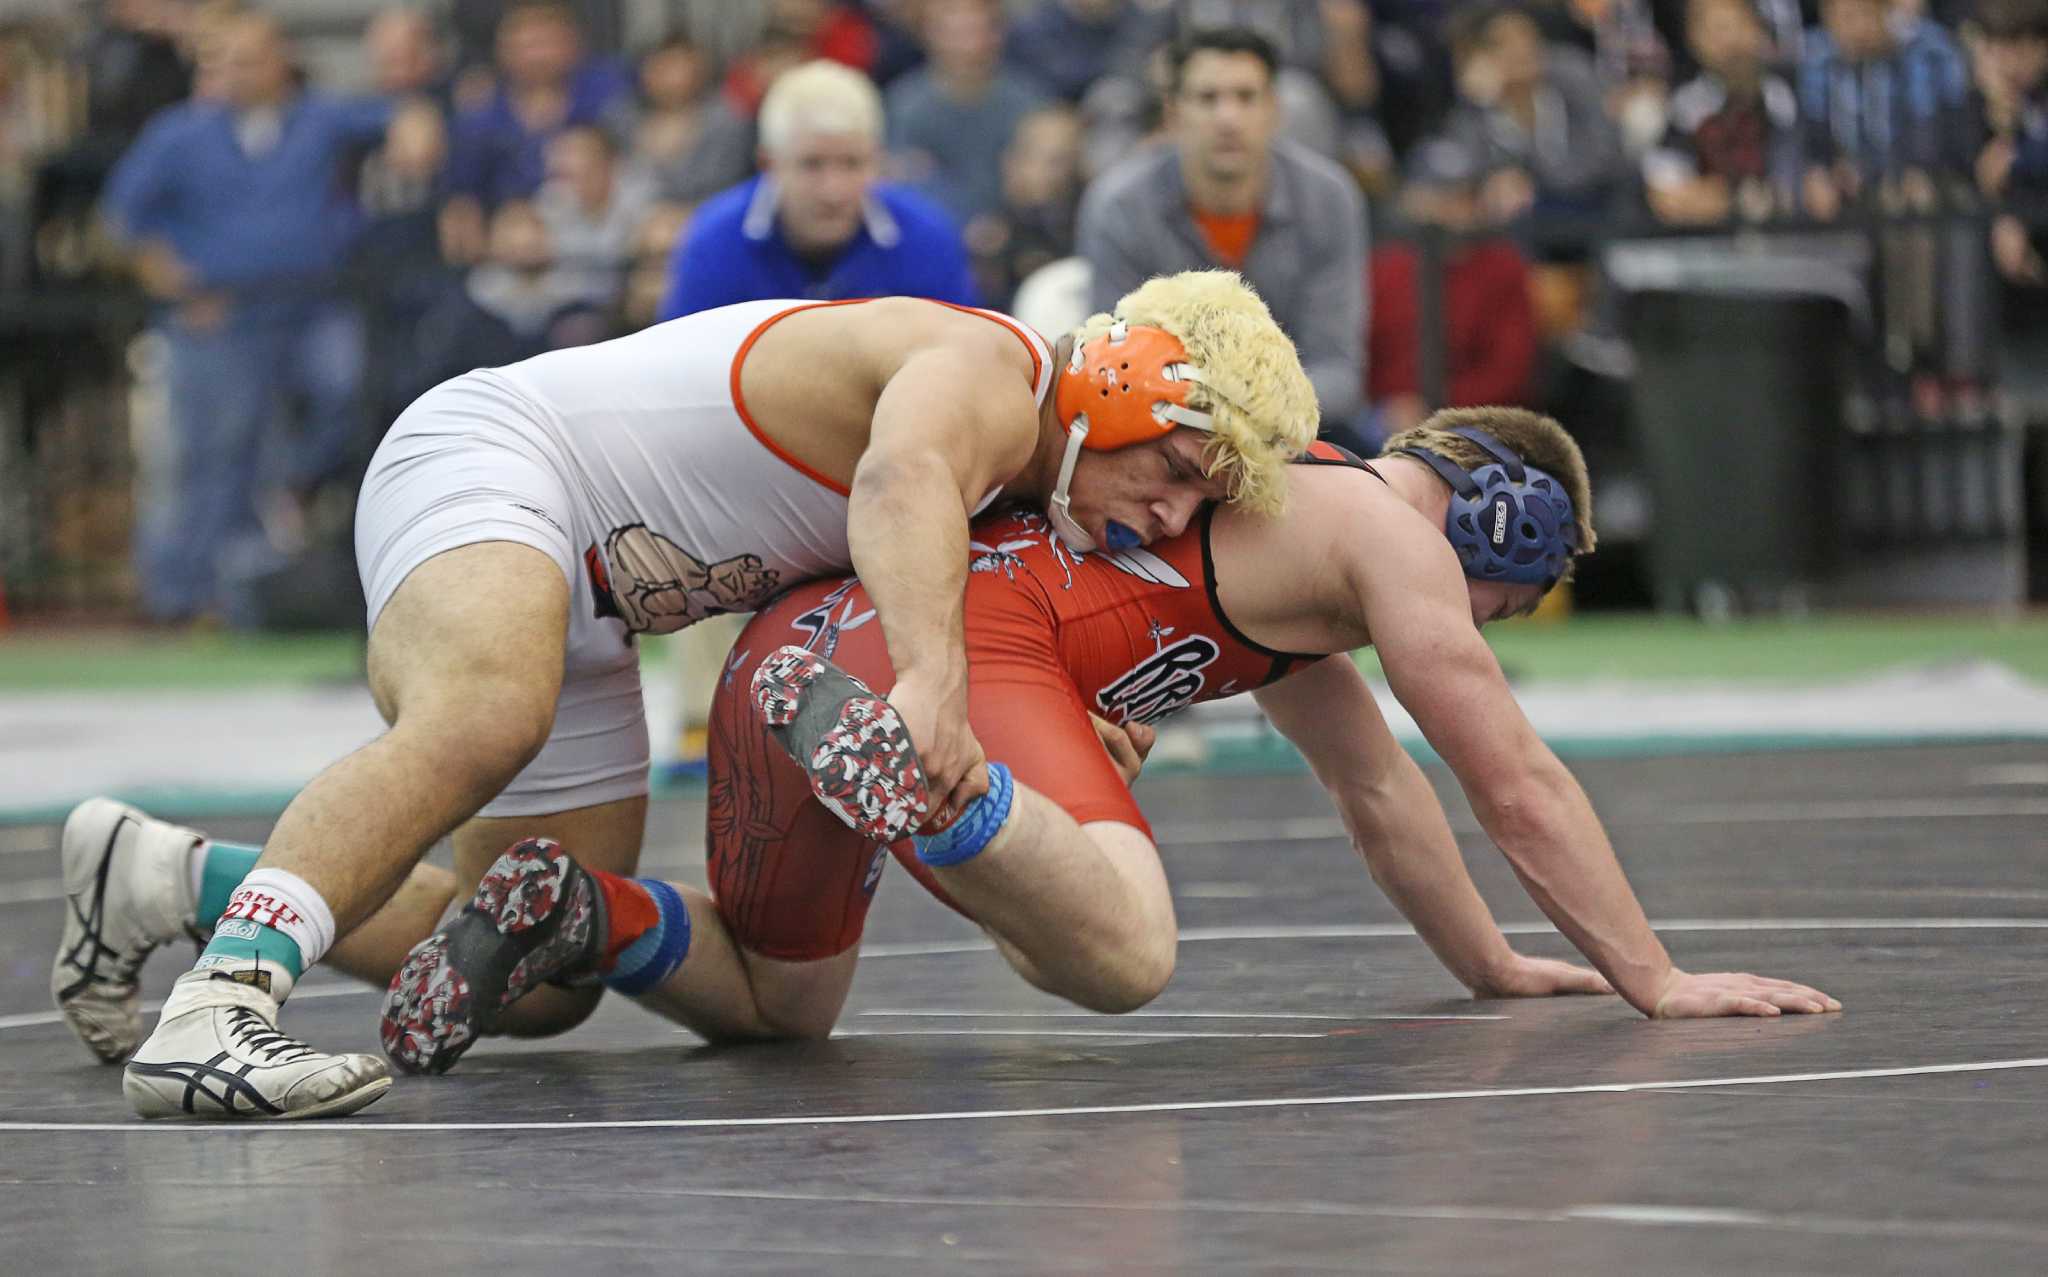 History in the making Newtown captures first State Open wrestling title